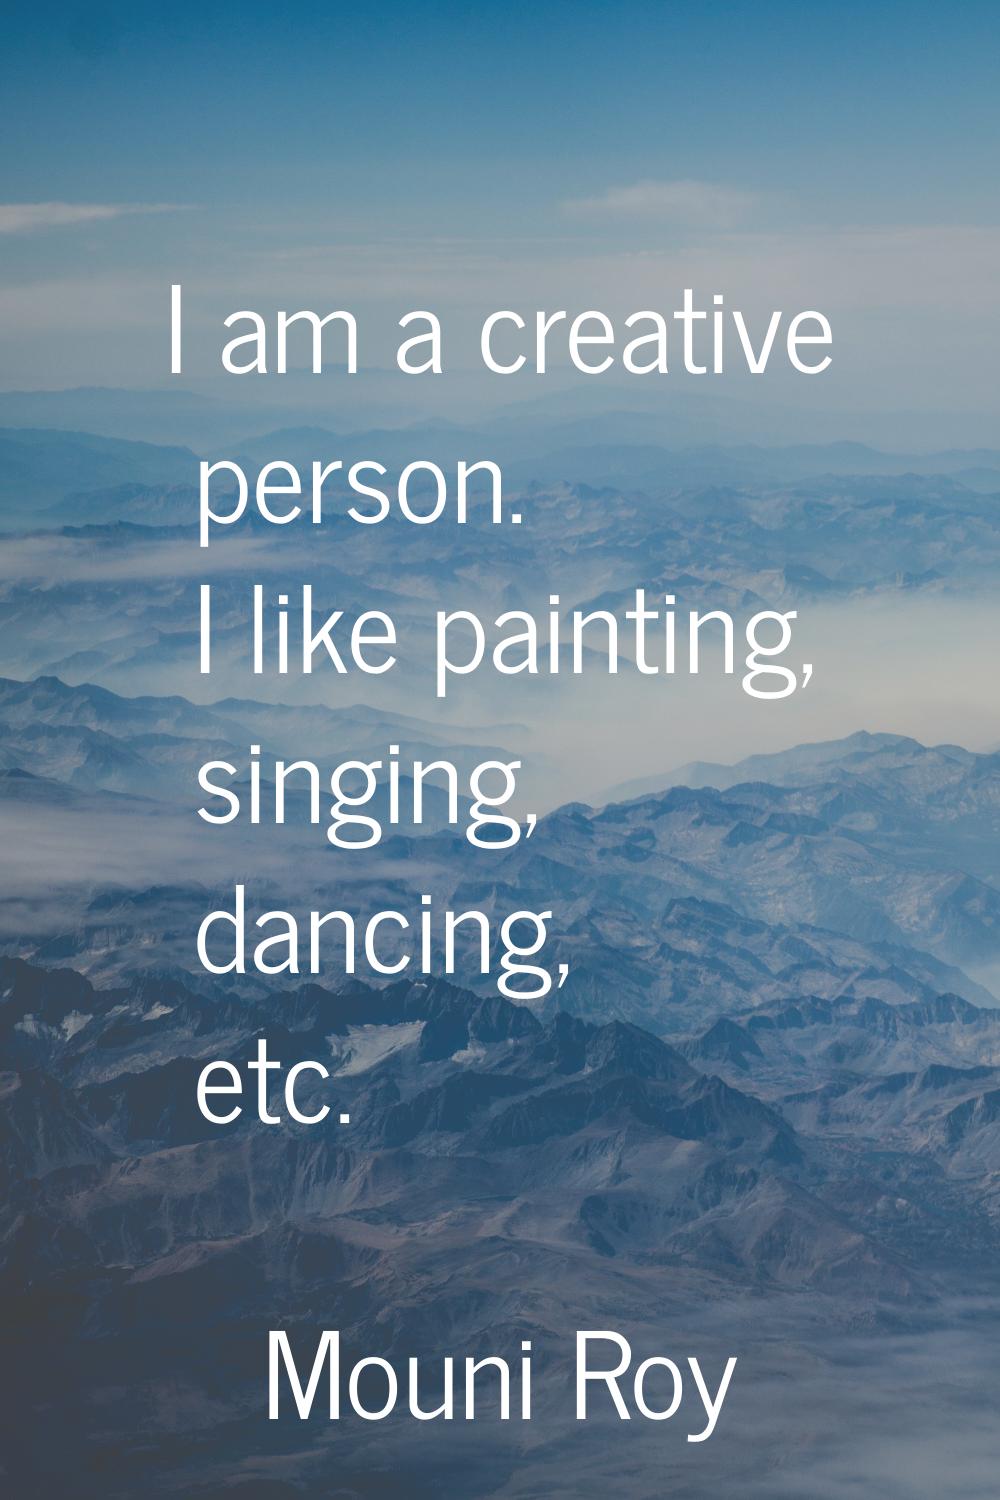 I am a creative person. I like painting, singing, dancing, etc.